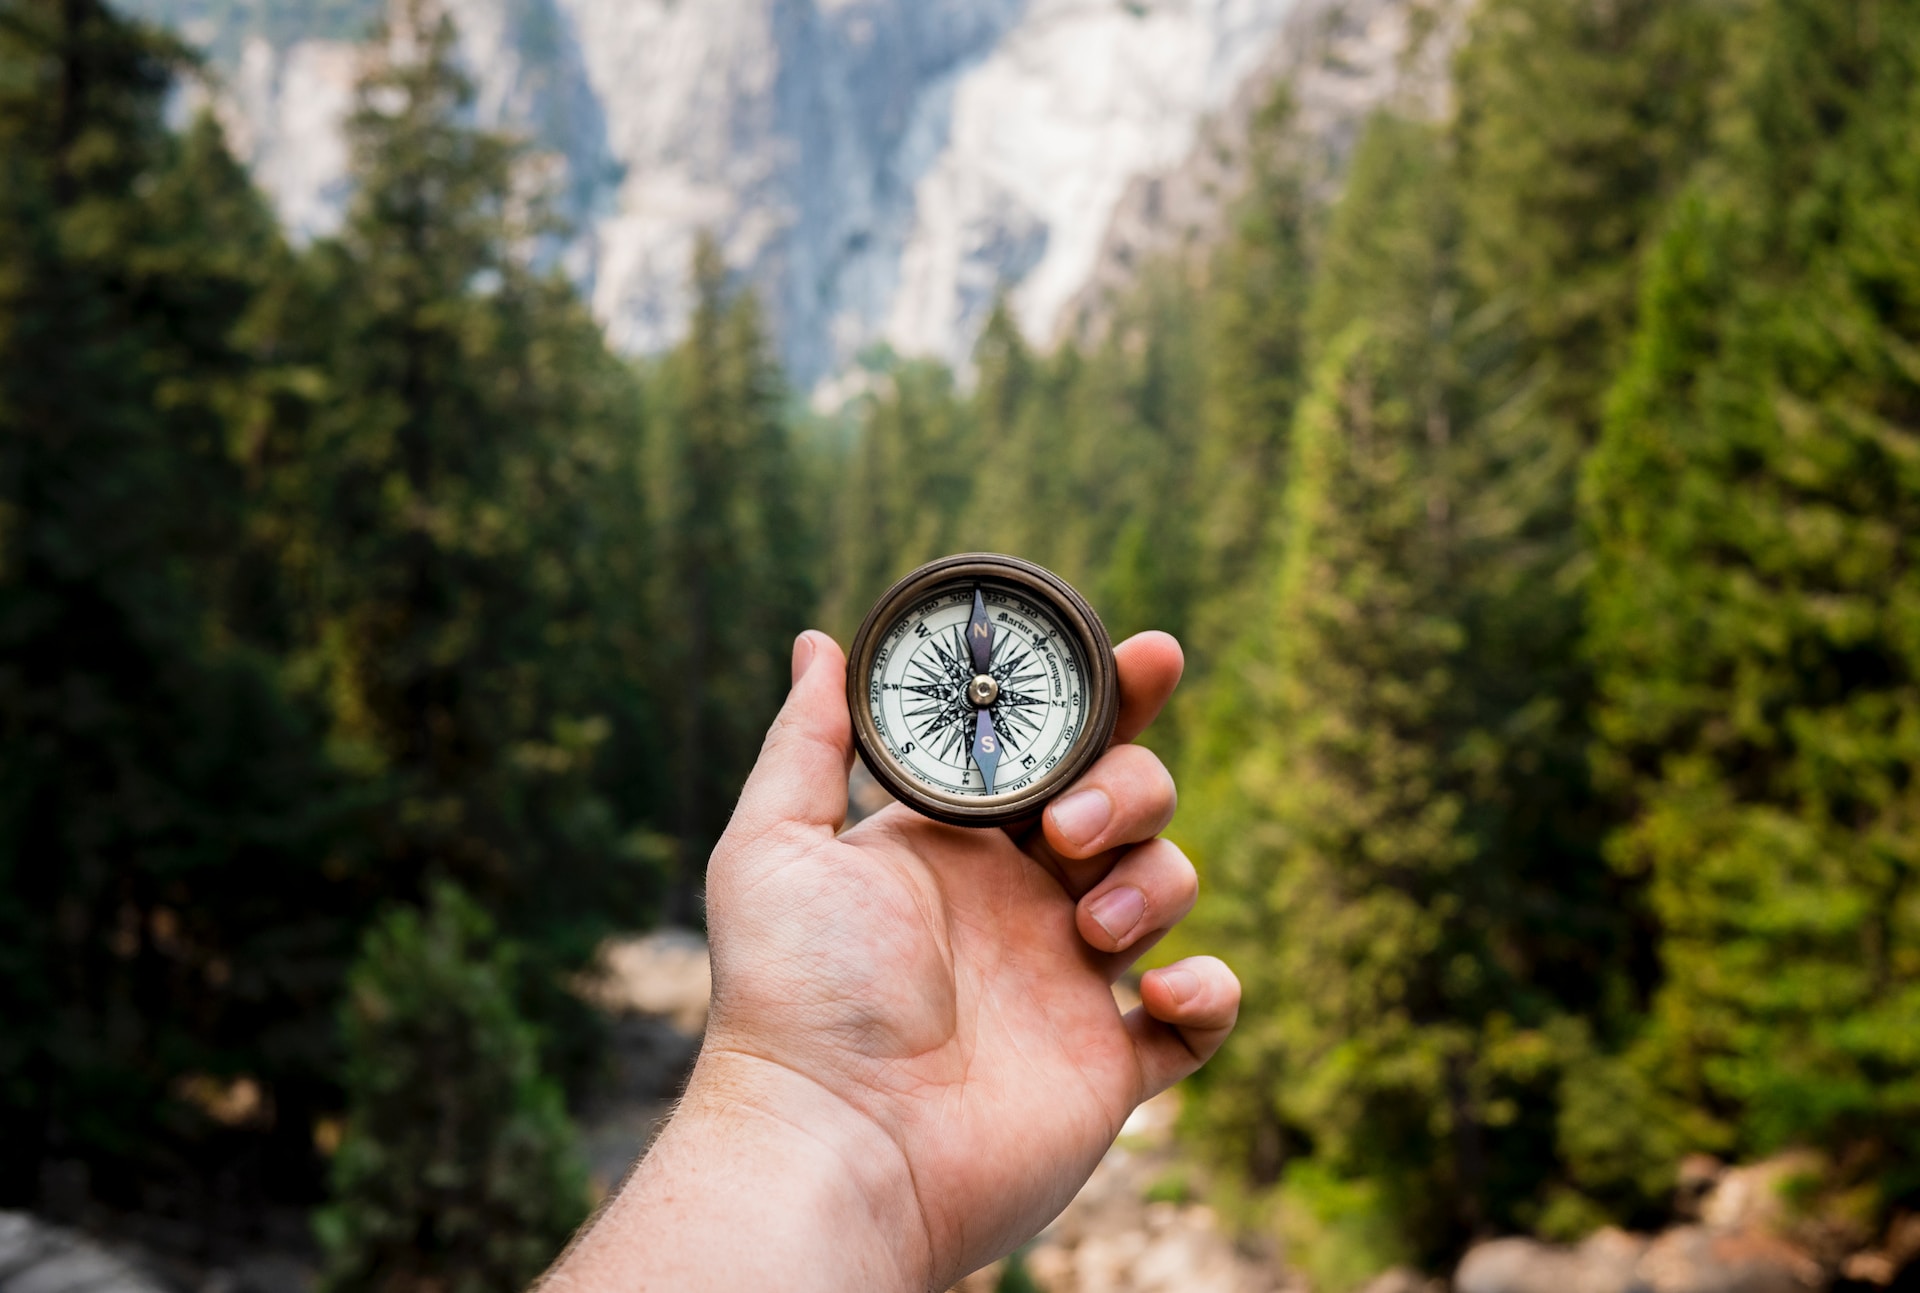 A compass being held up against the backdrop of a forest